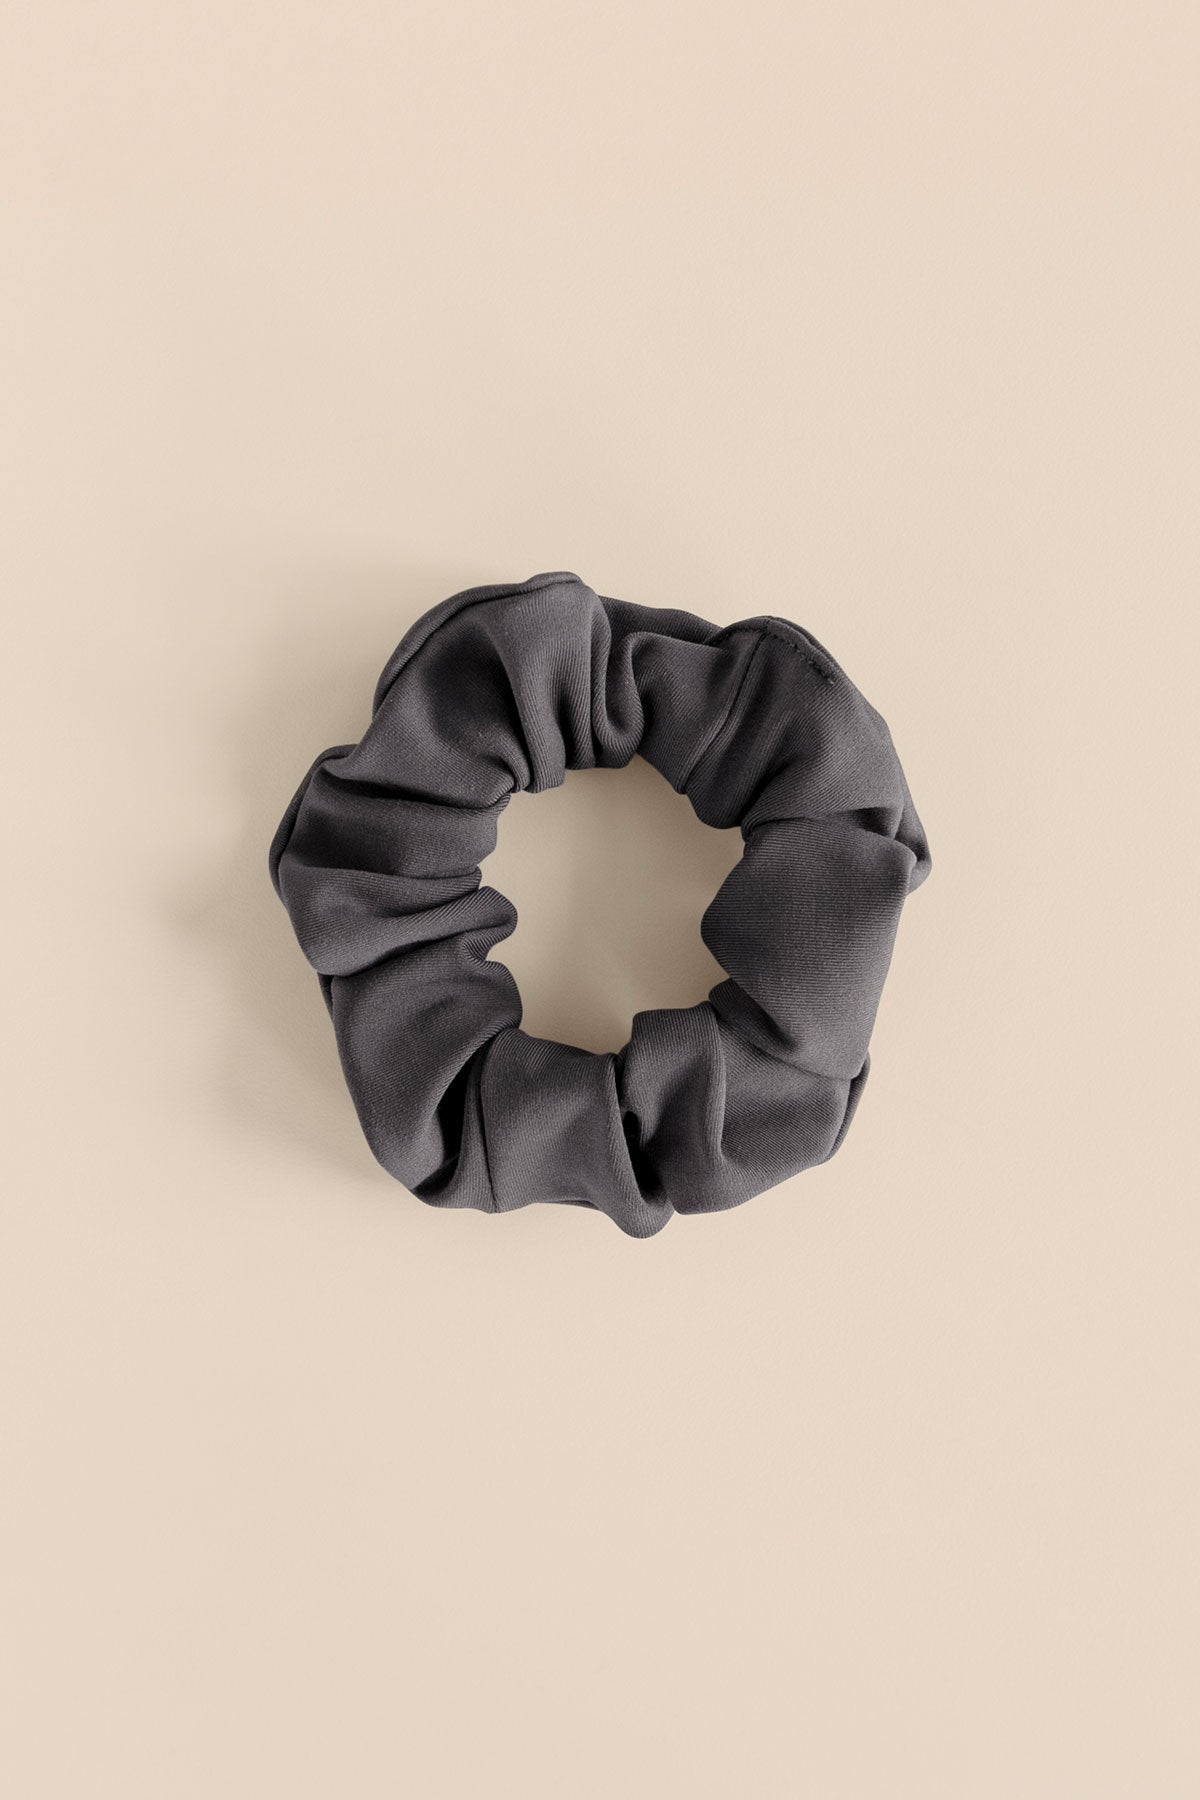 Girlfriend Collective - The Scrunchie - Made from Recycled Water Bottles - Weekendbee - sustainable sportswear